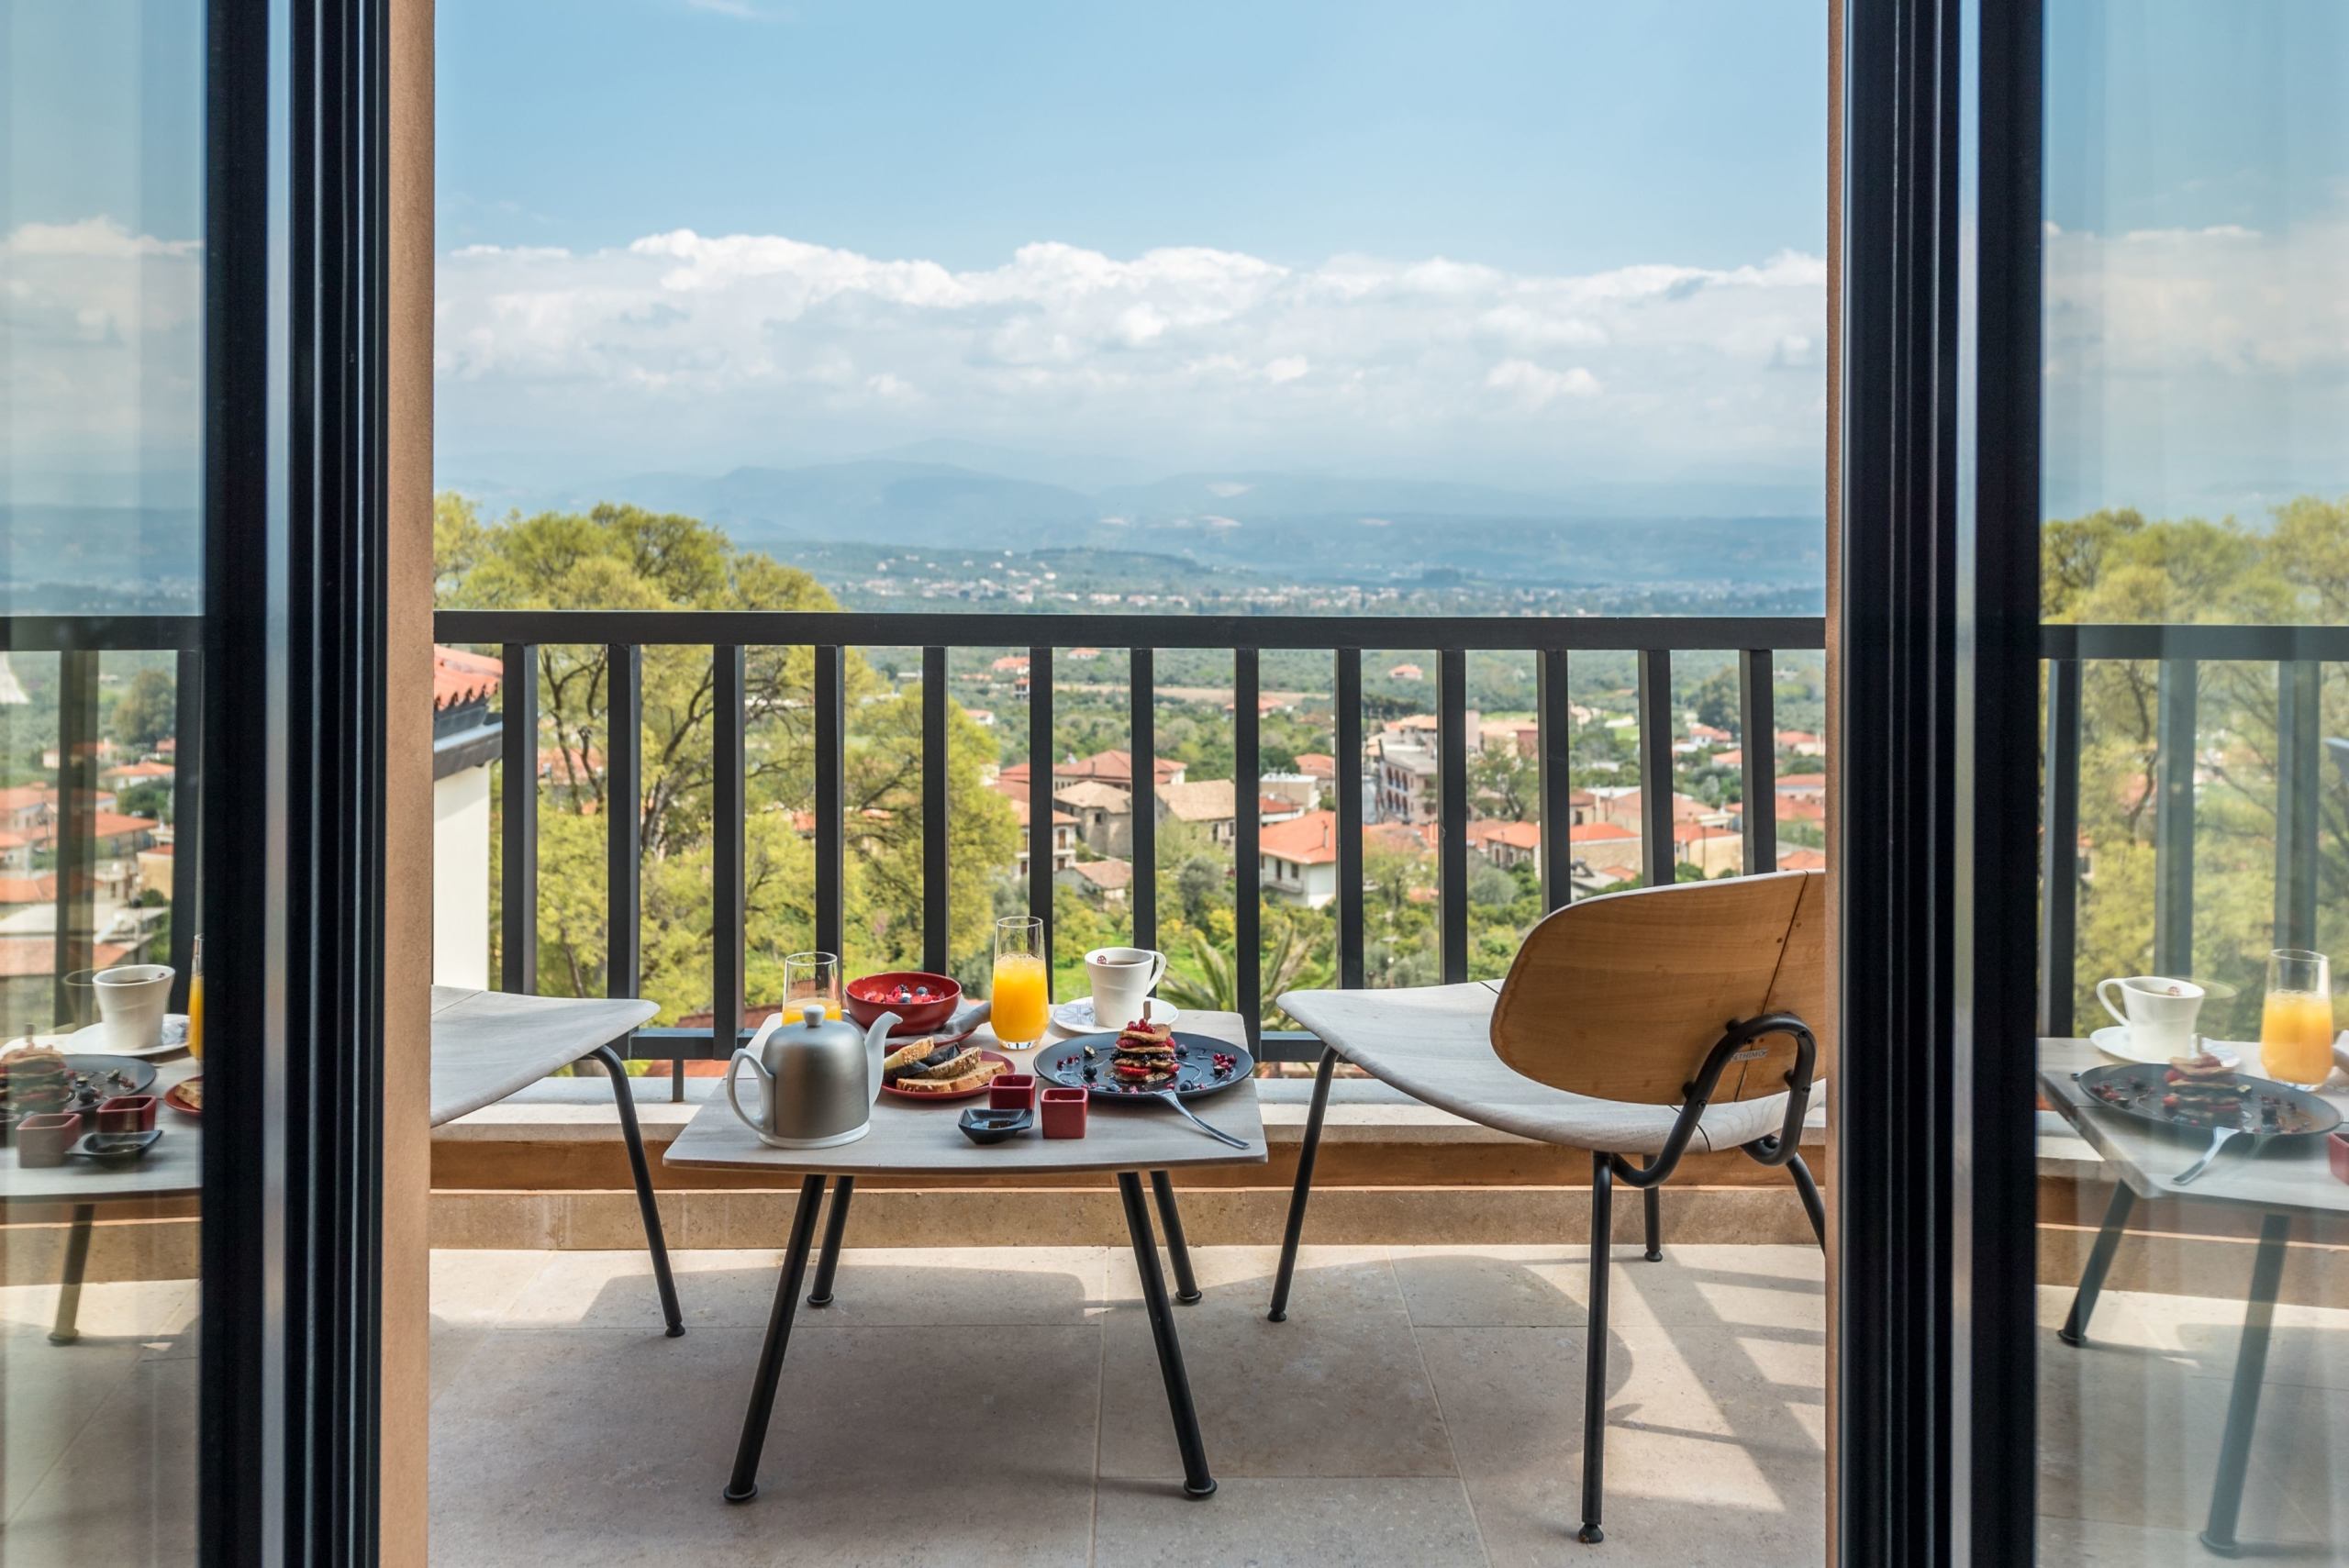 Breakfast being served on a balcony overlooking the Greek countryside